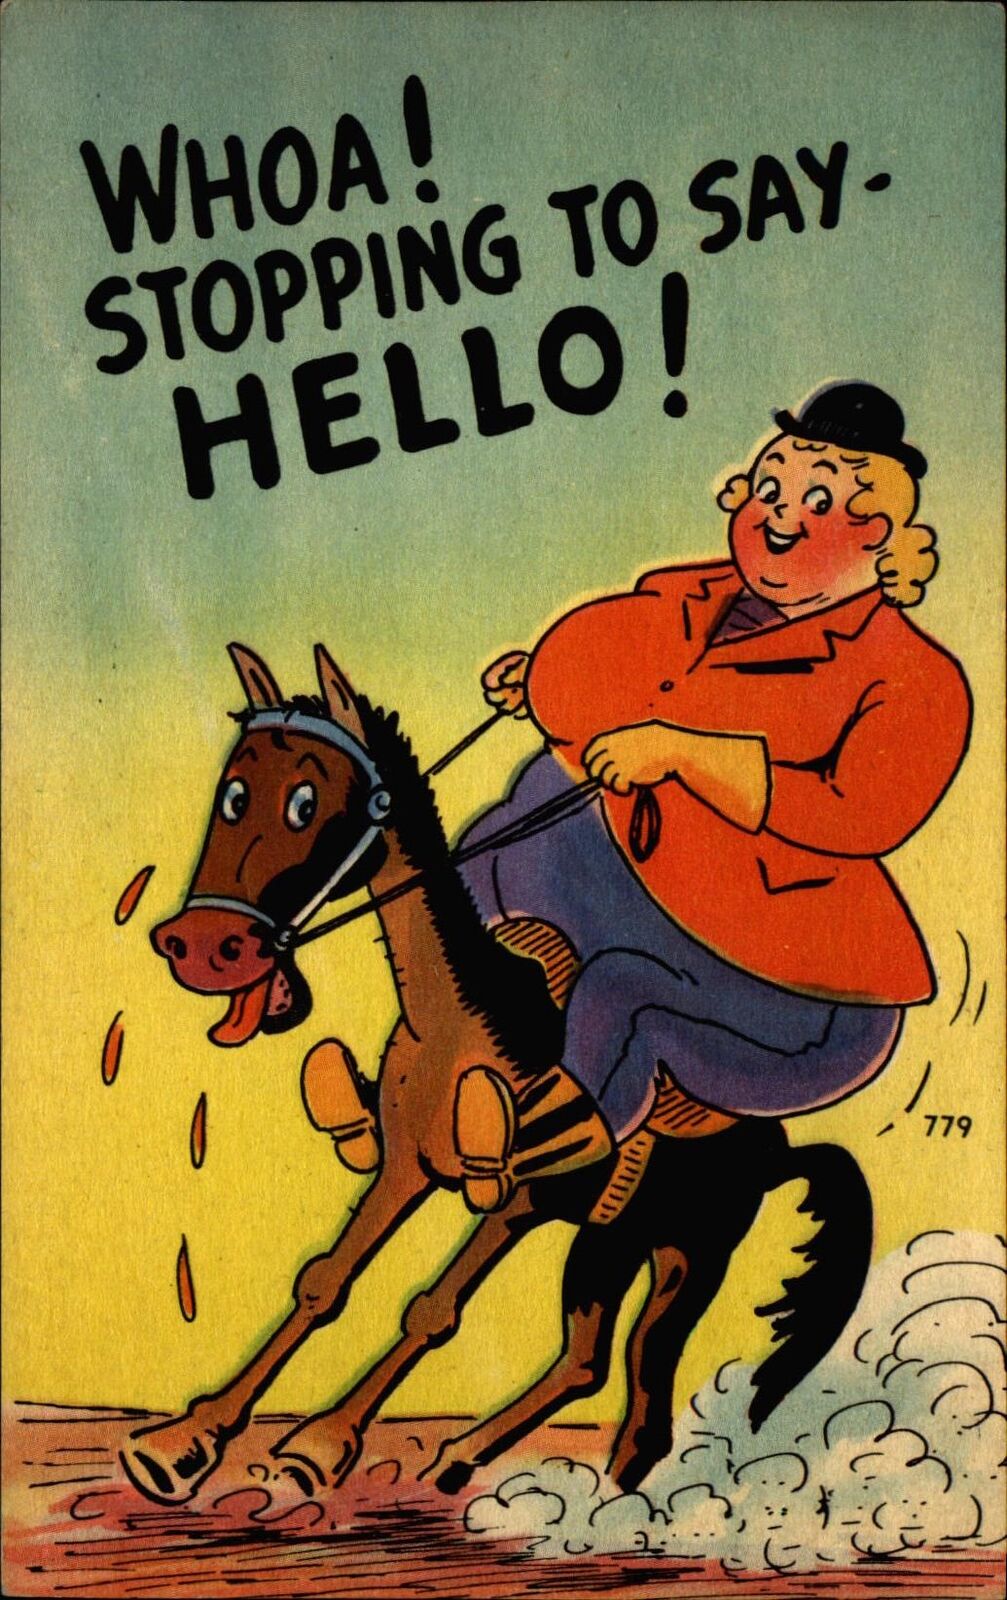 BIG WOMAN riding habit sweating horse ~ STOPPING TO SAY HELLO ~ 1940s comic